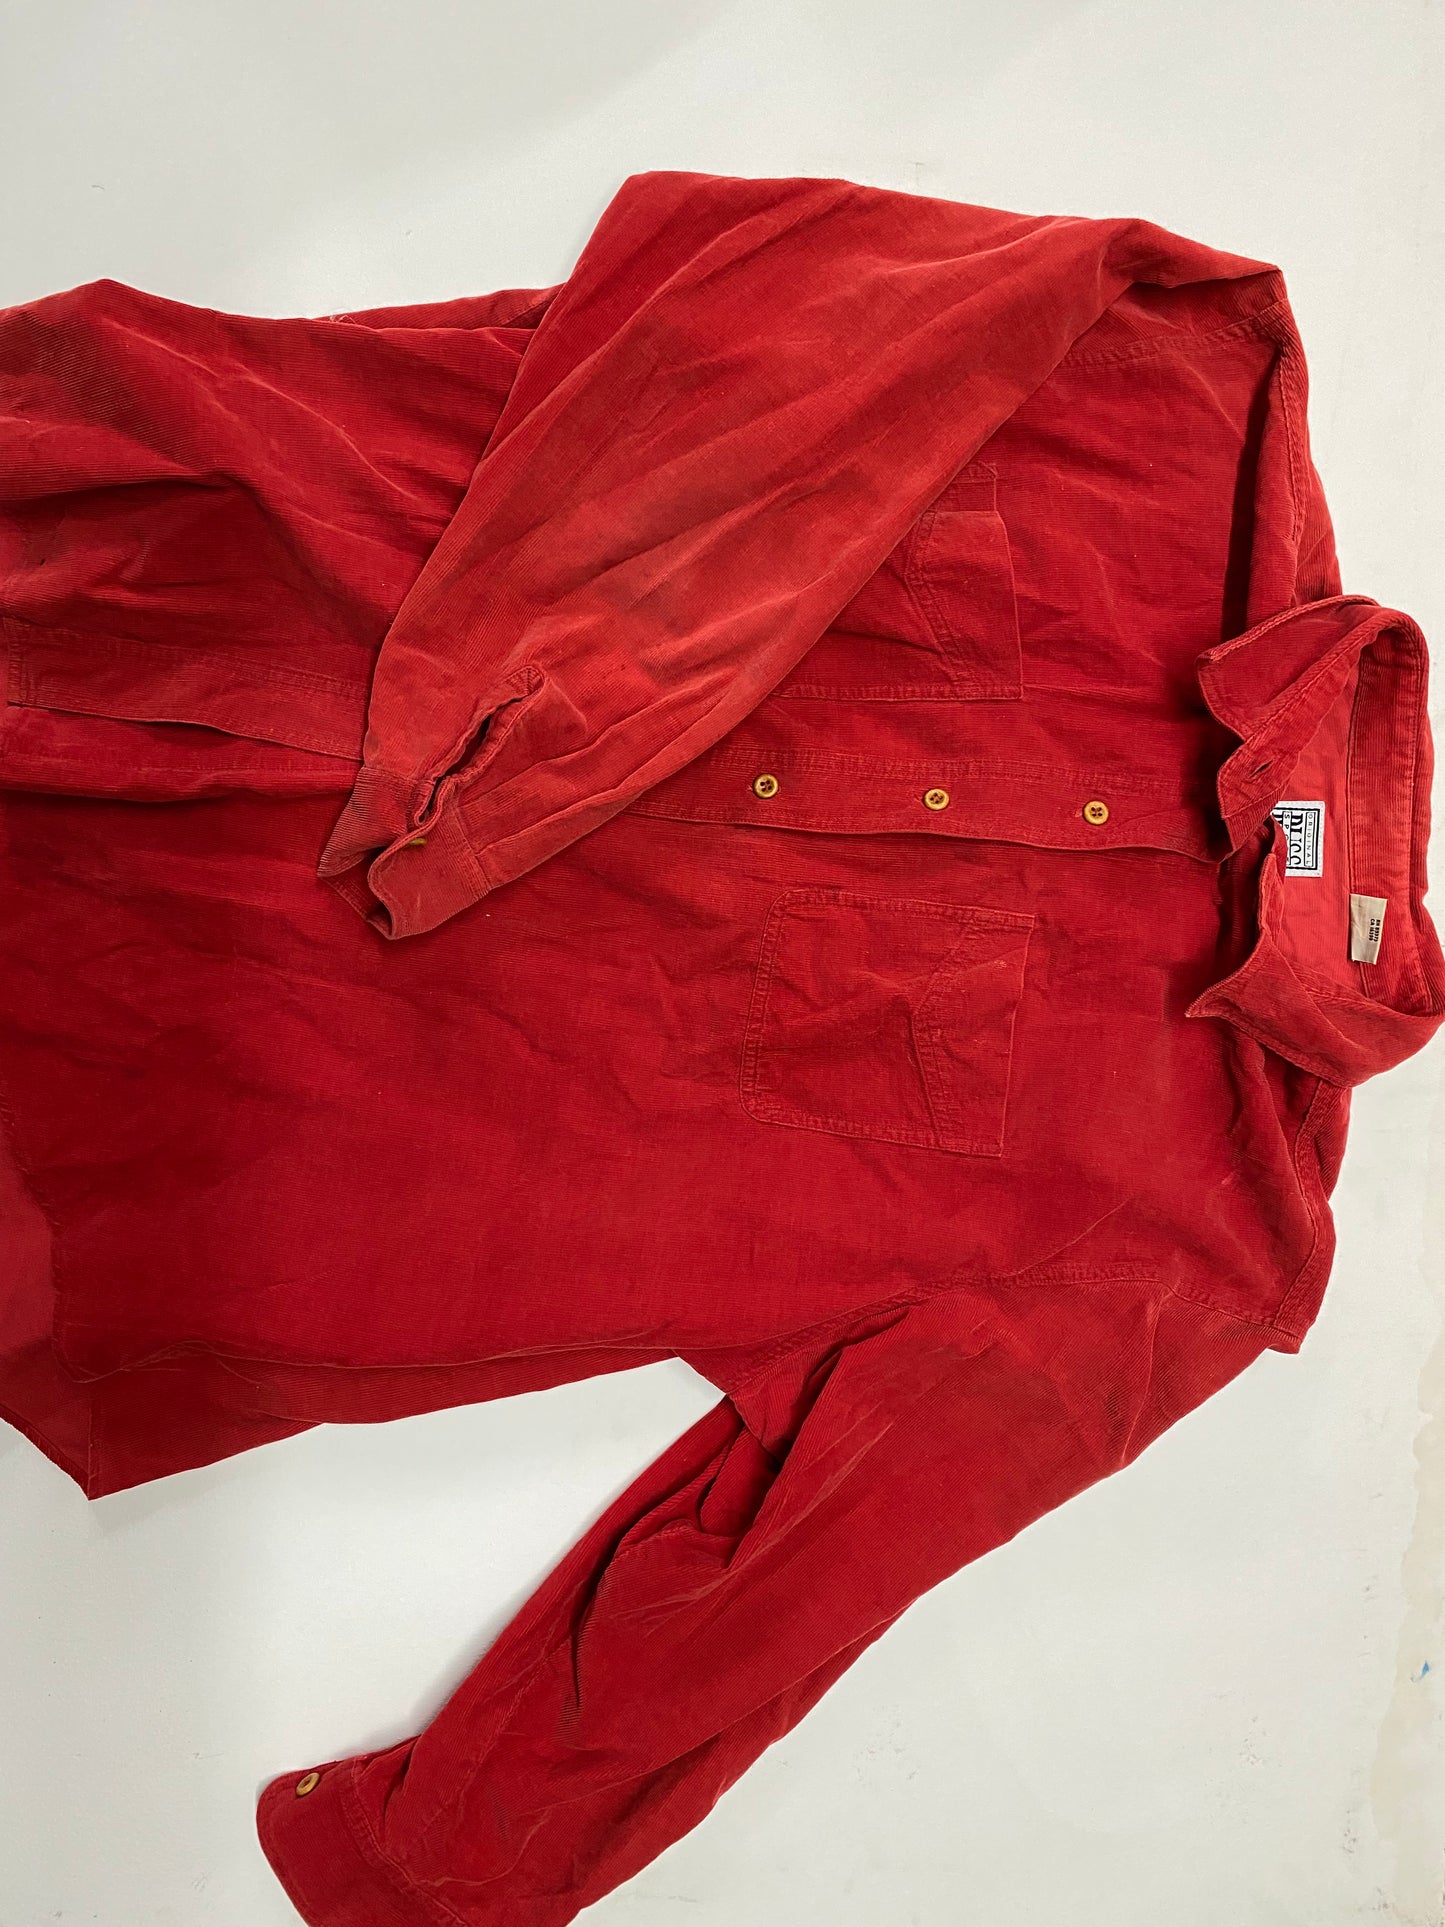 Russ Sport Red Cotton Button Down Size 2x